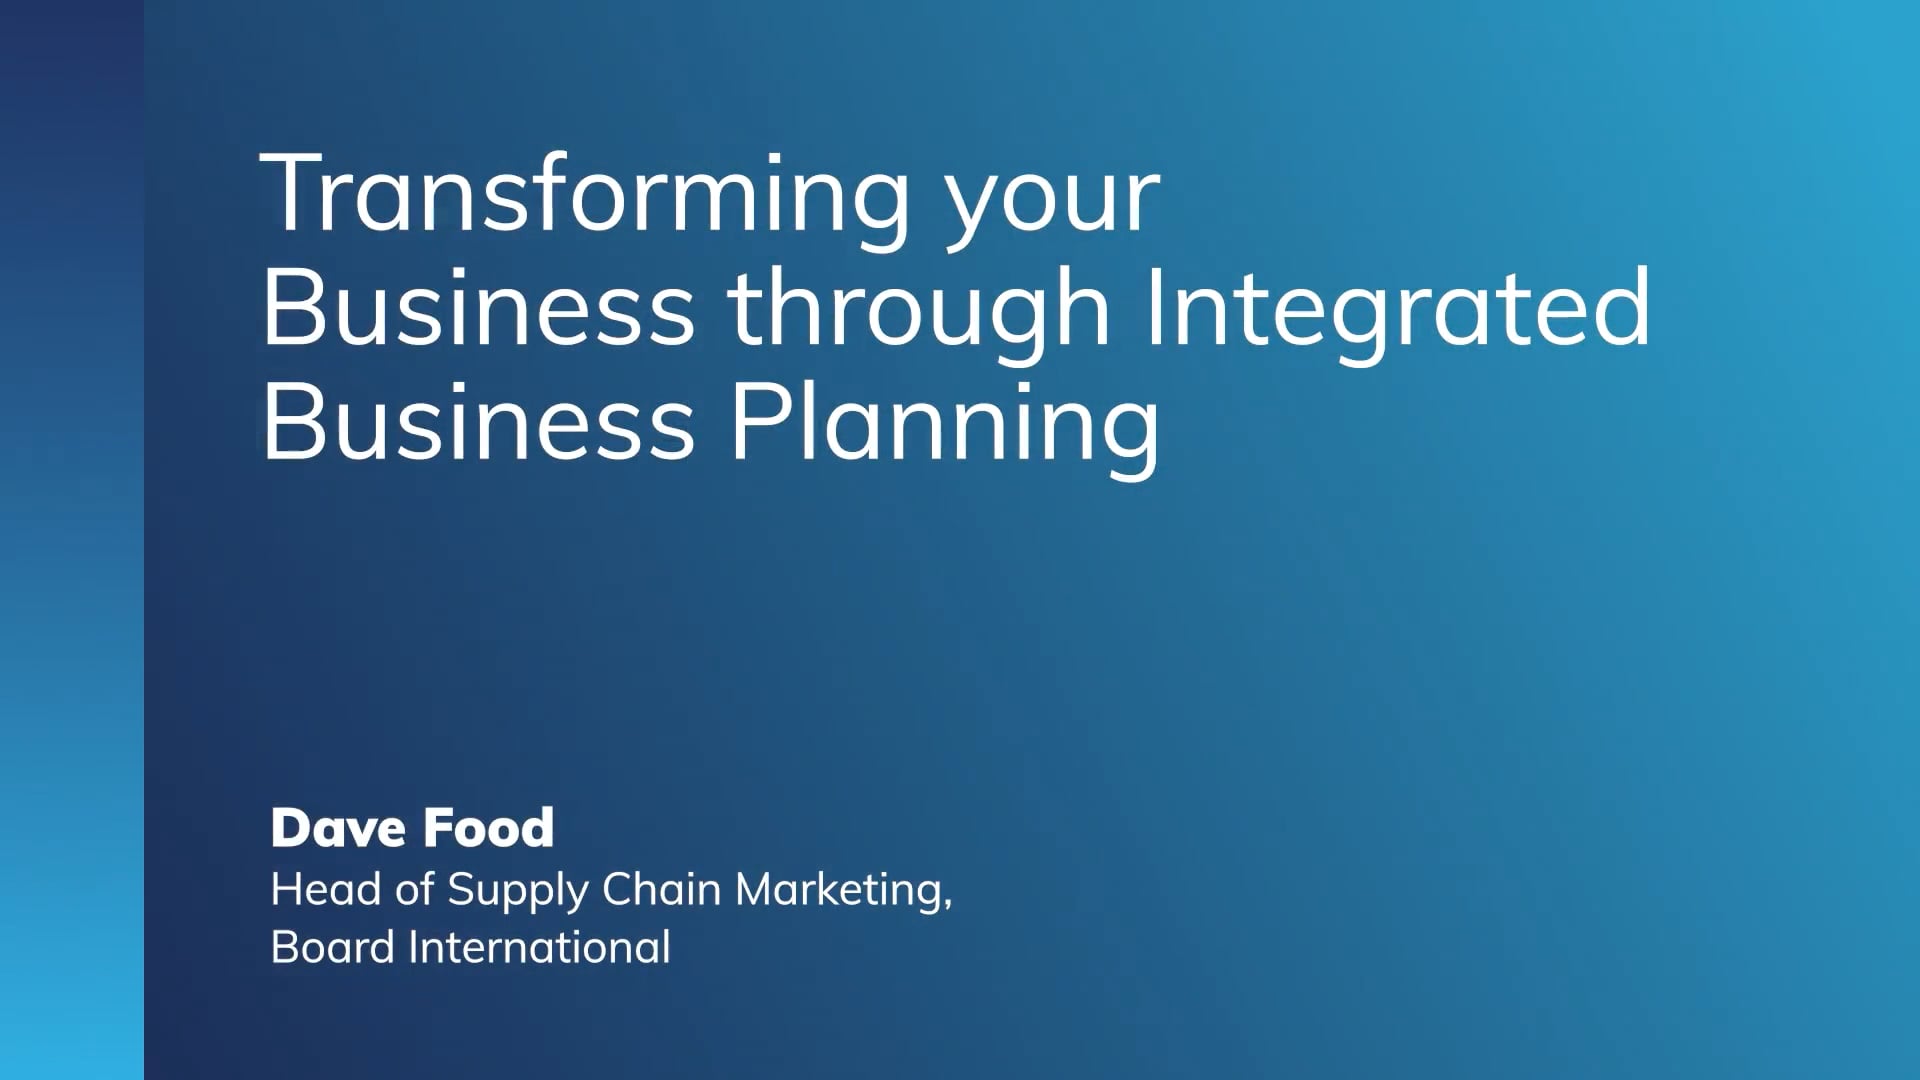 Transforming your Business through Integrated Business Planning